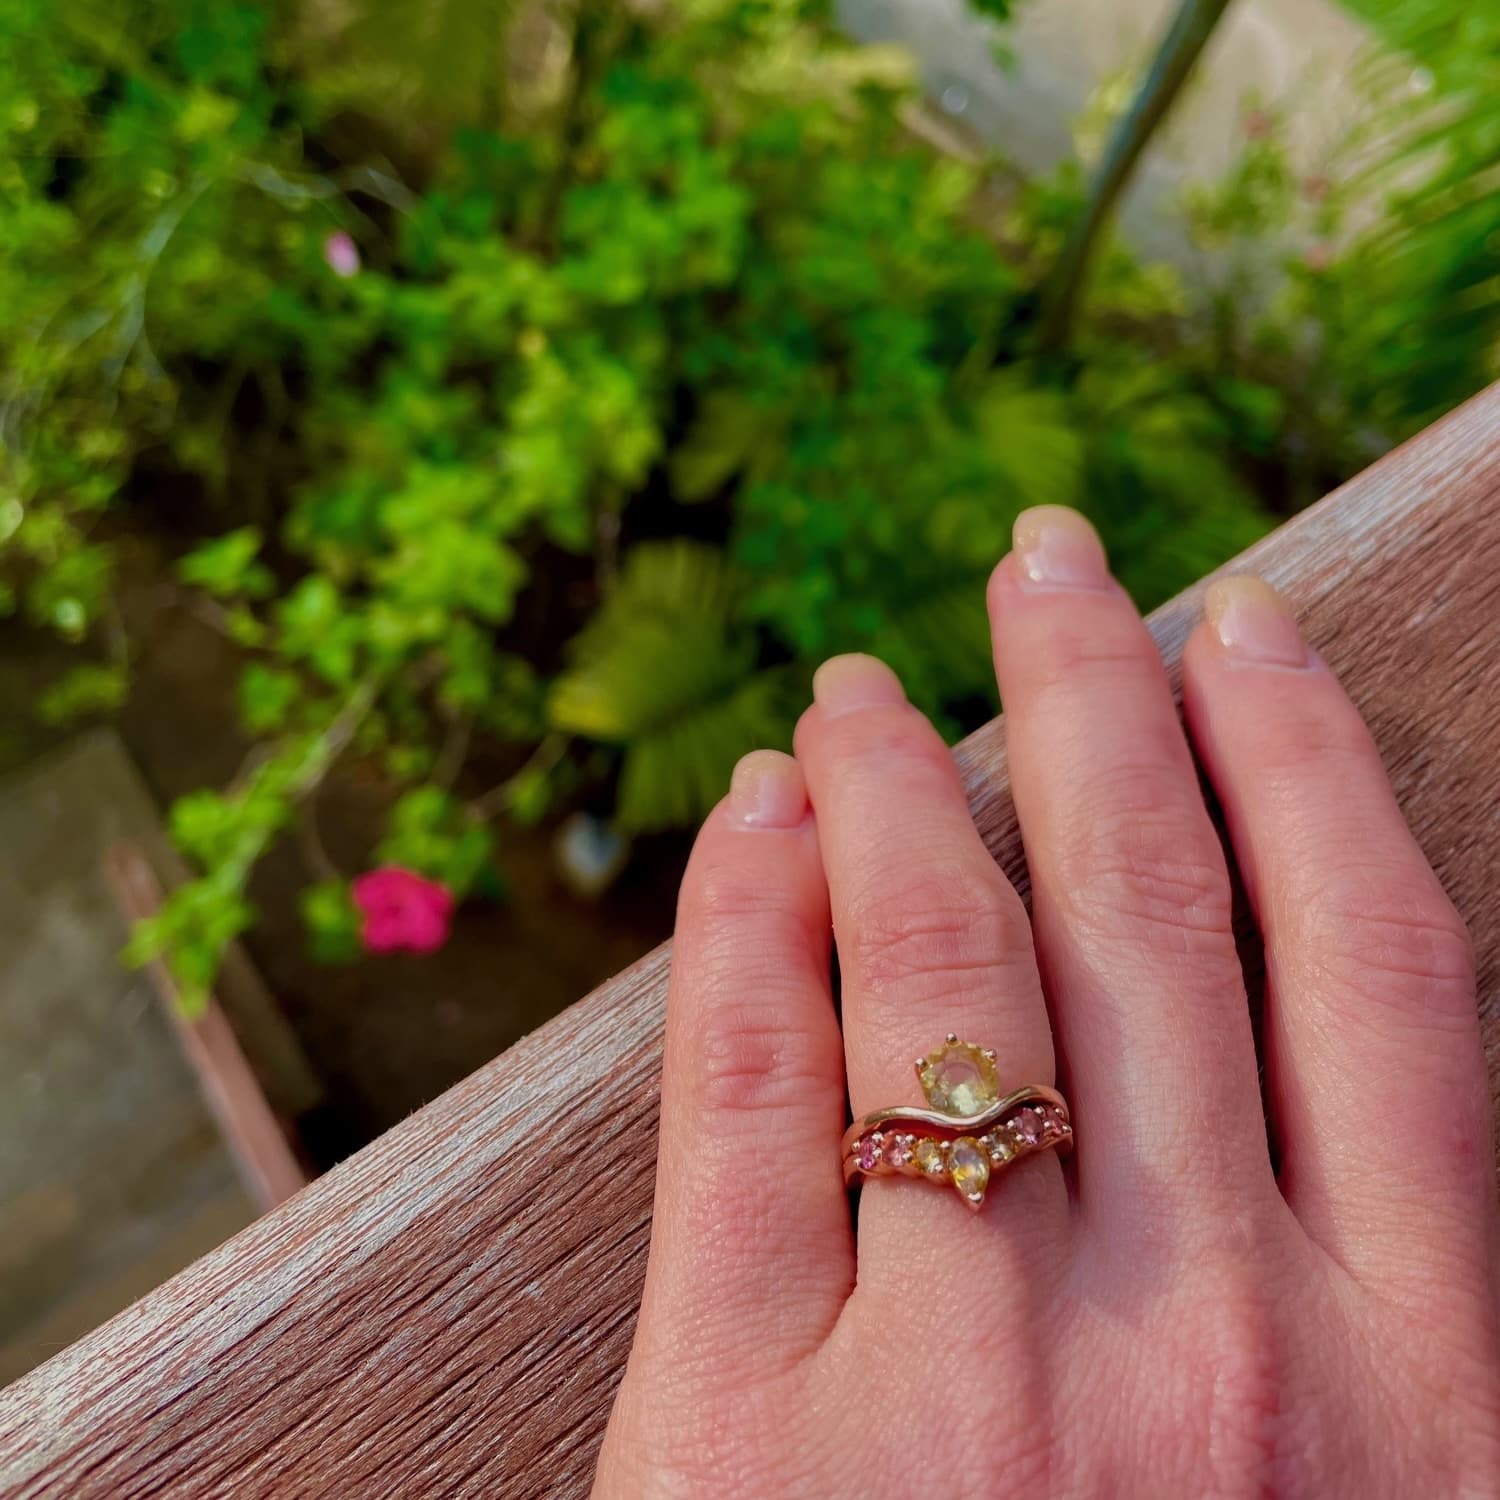 A photo from a customer review, featuring a yellow sapphire "Ruenna" ring and a custom sapphire "Merope" band on a well-manicured hand overlooking a garden.